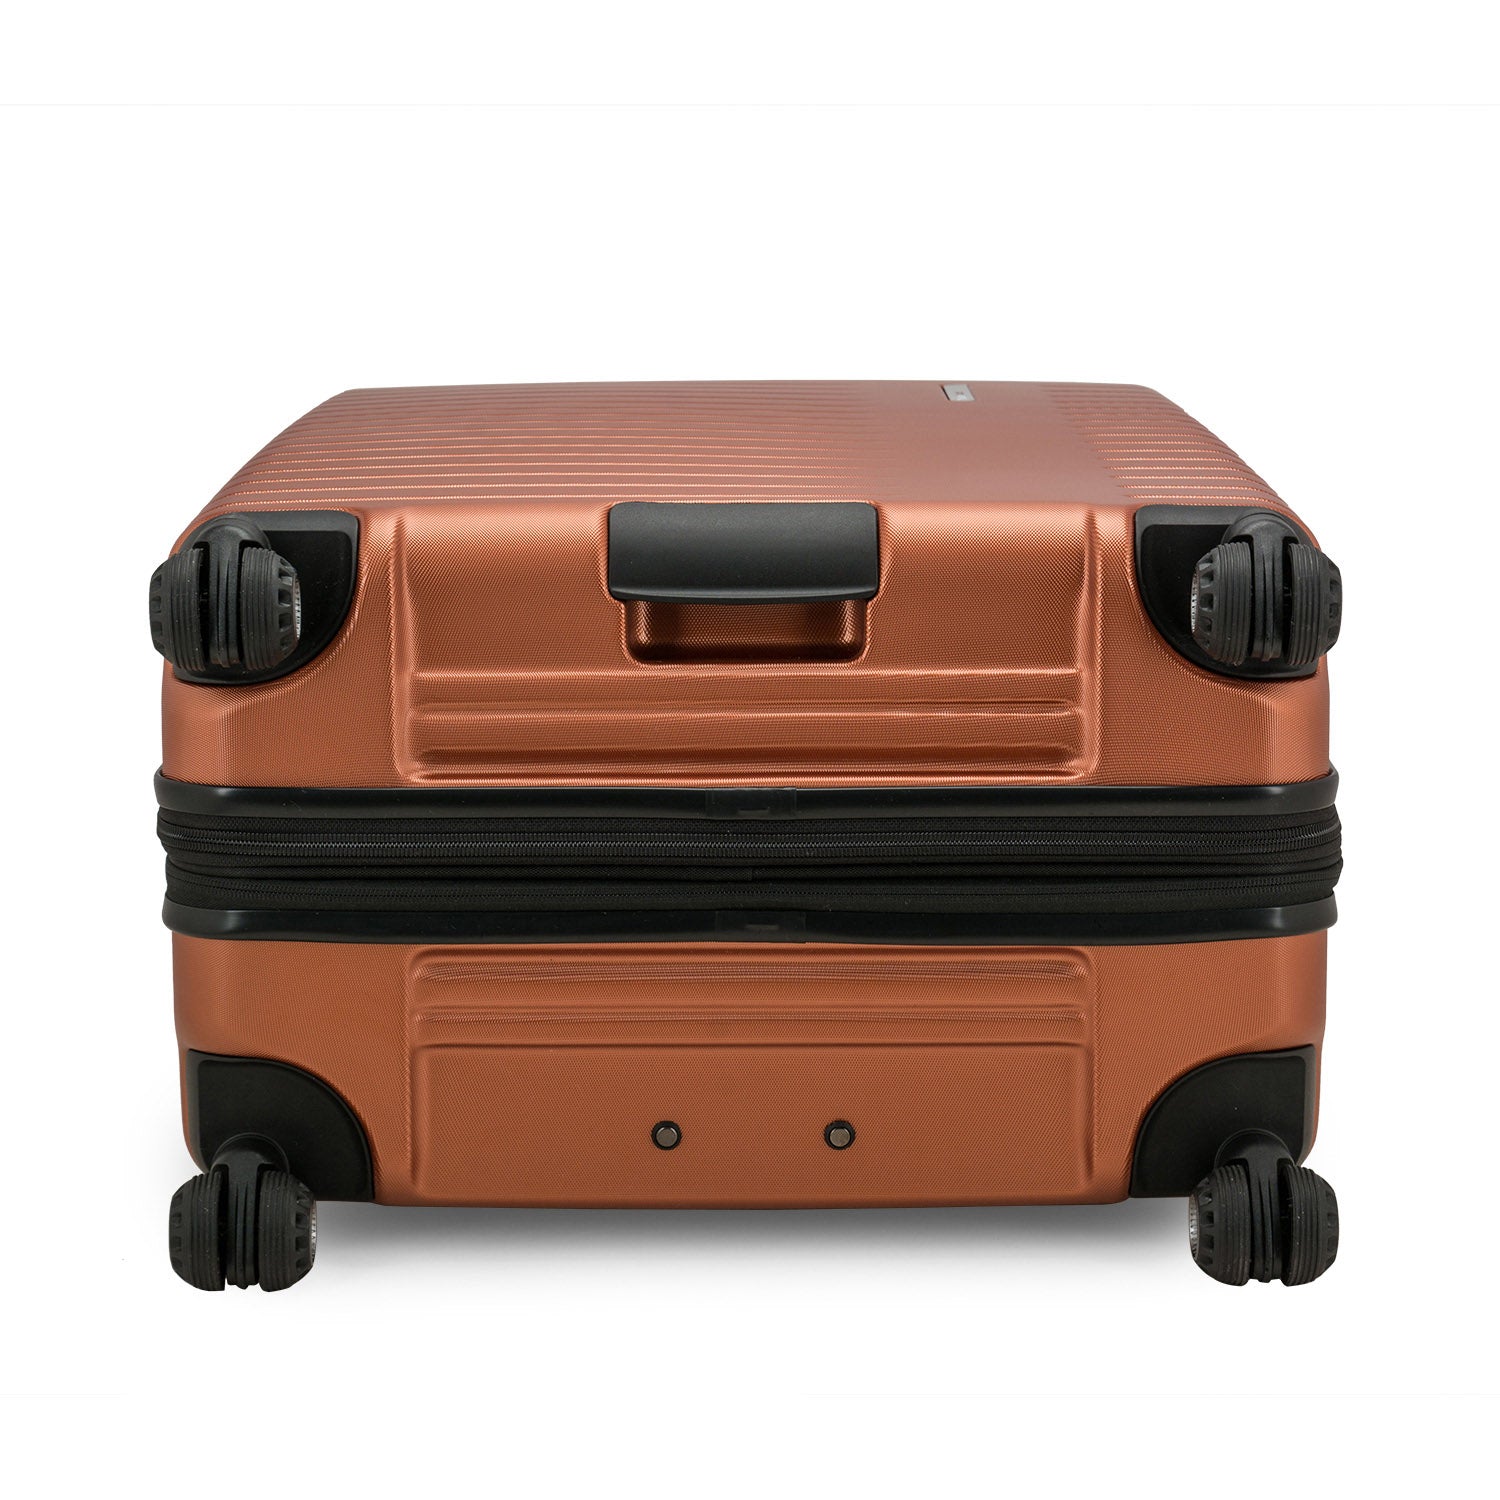 Archer Large Checked Luggage Suitcase Piece with 4 Spinner Wheels